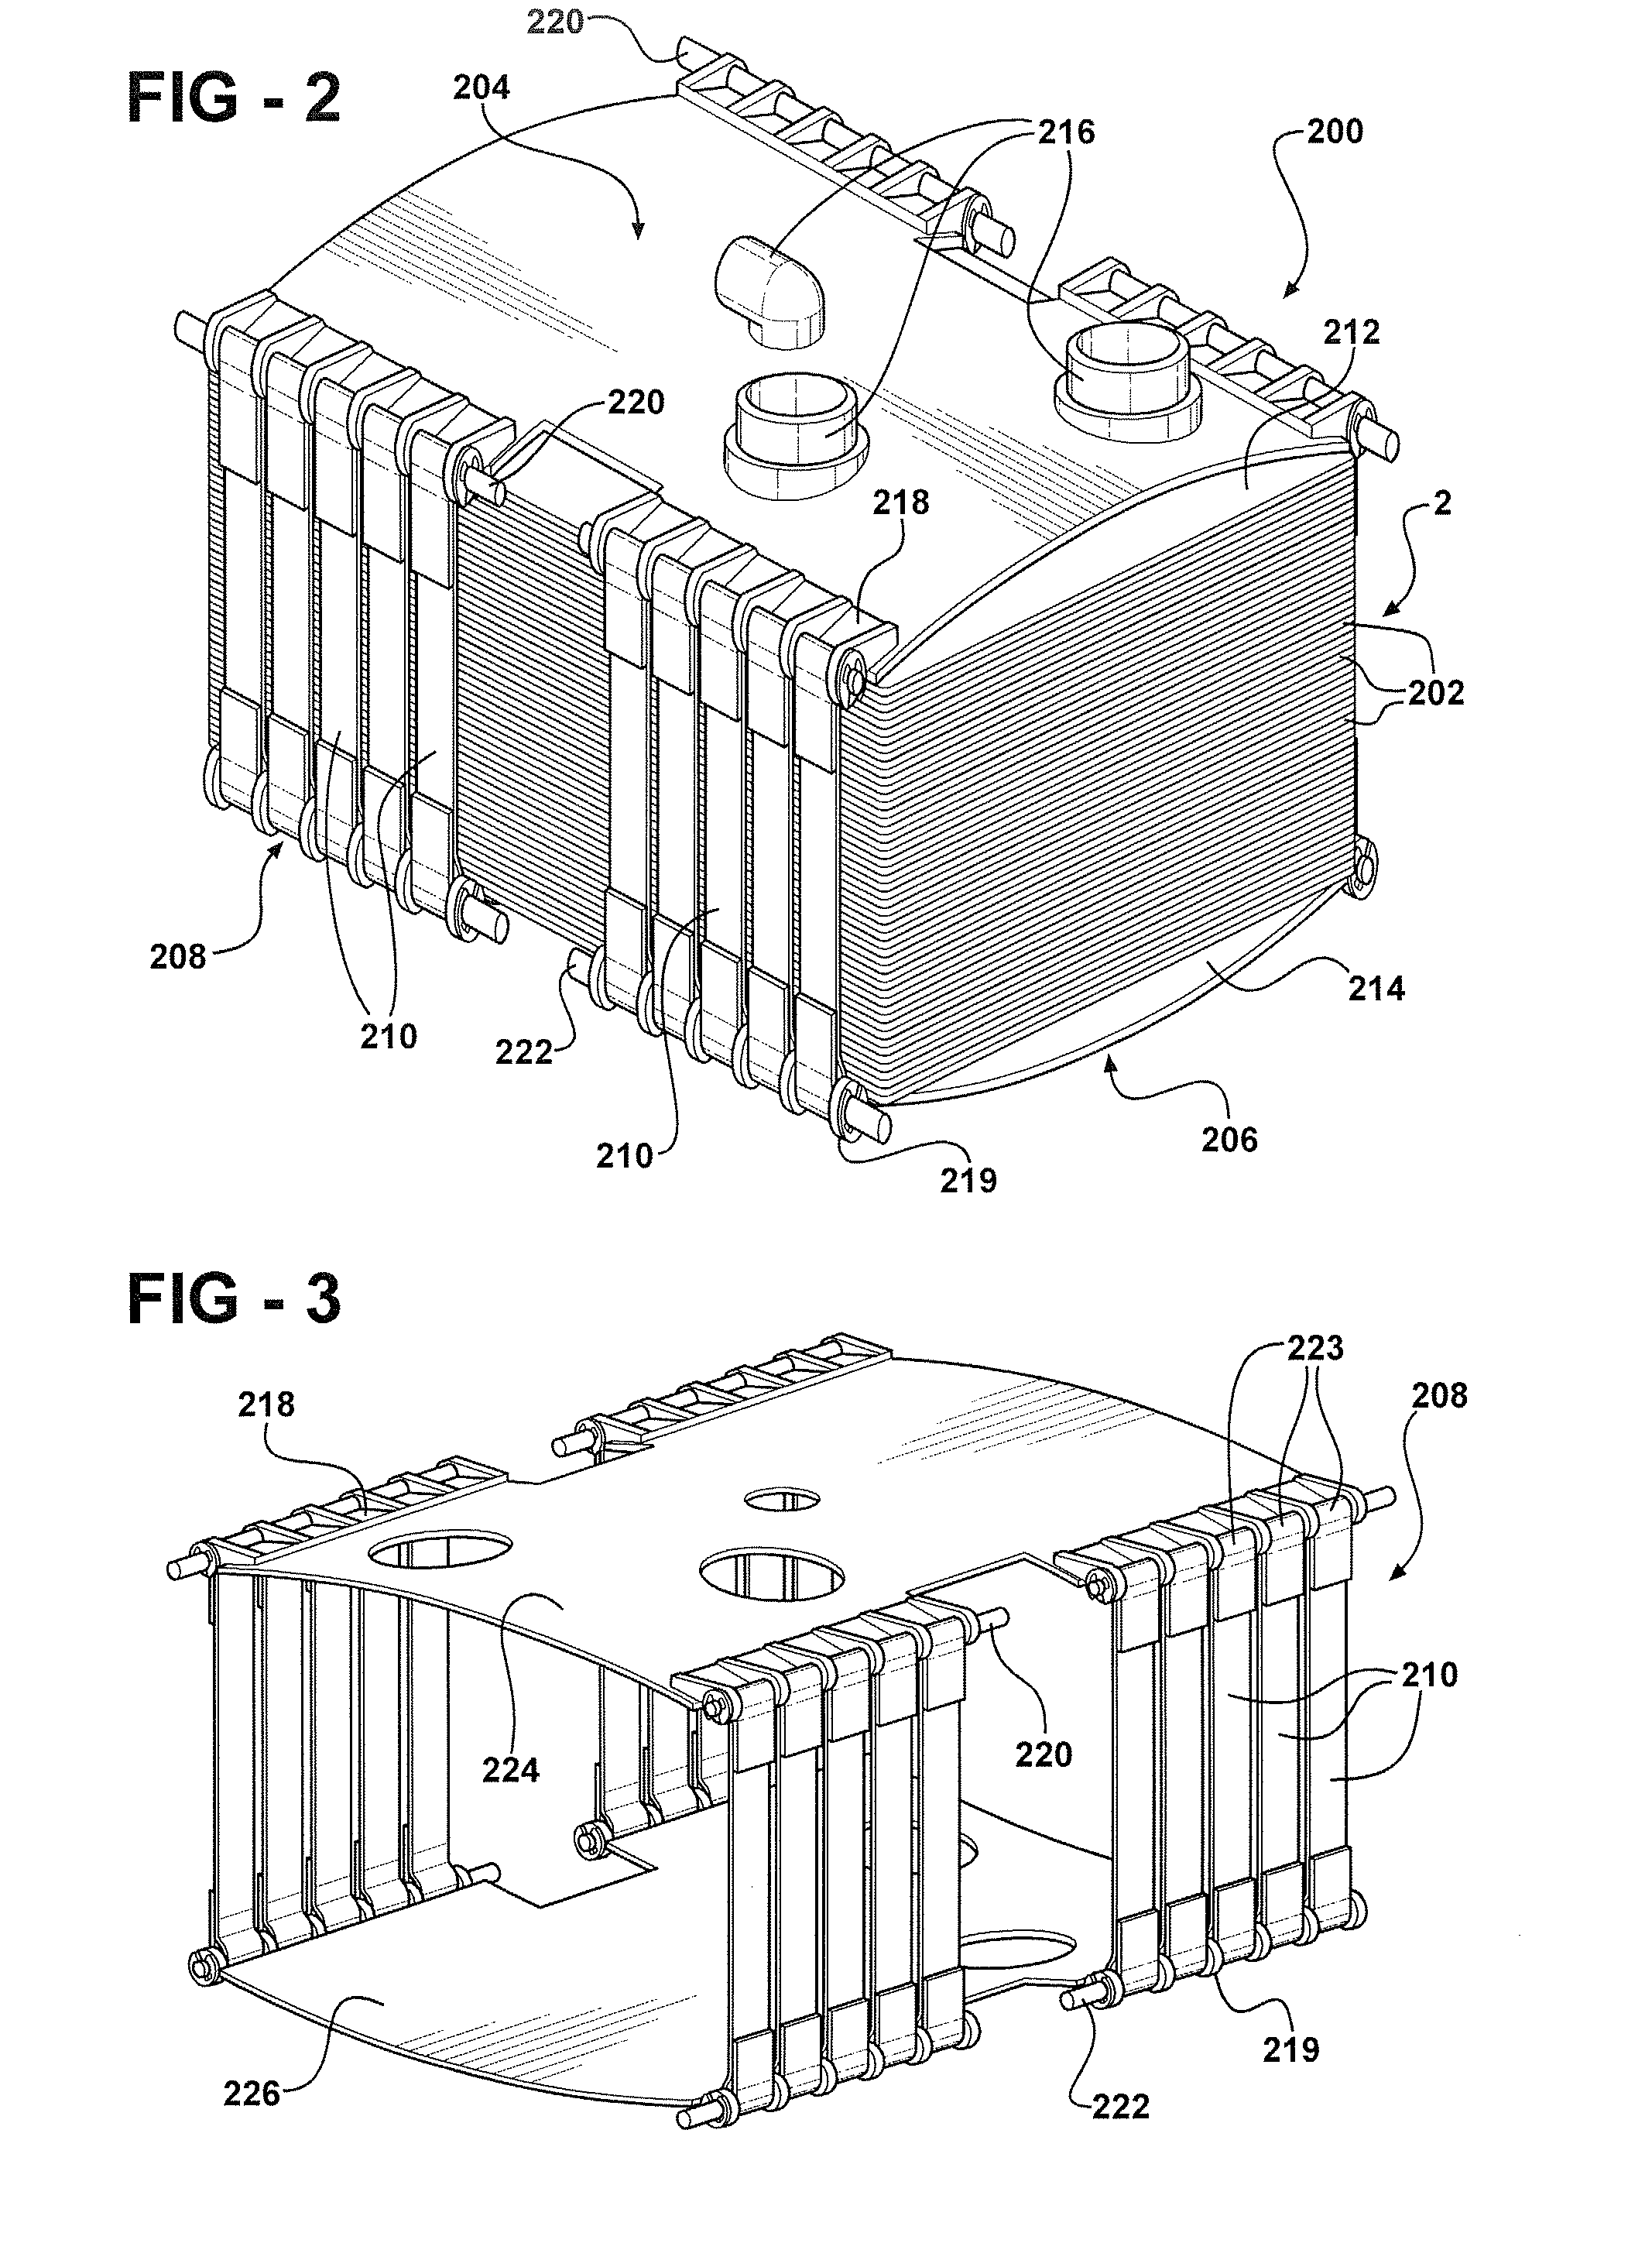 Fuel cell compression retention system using compliant strapping